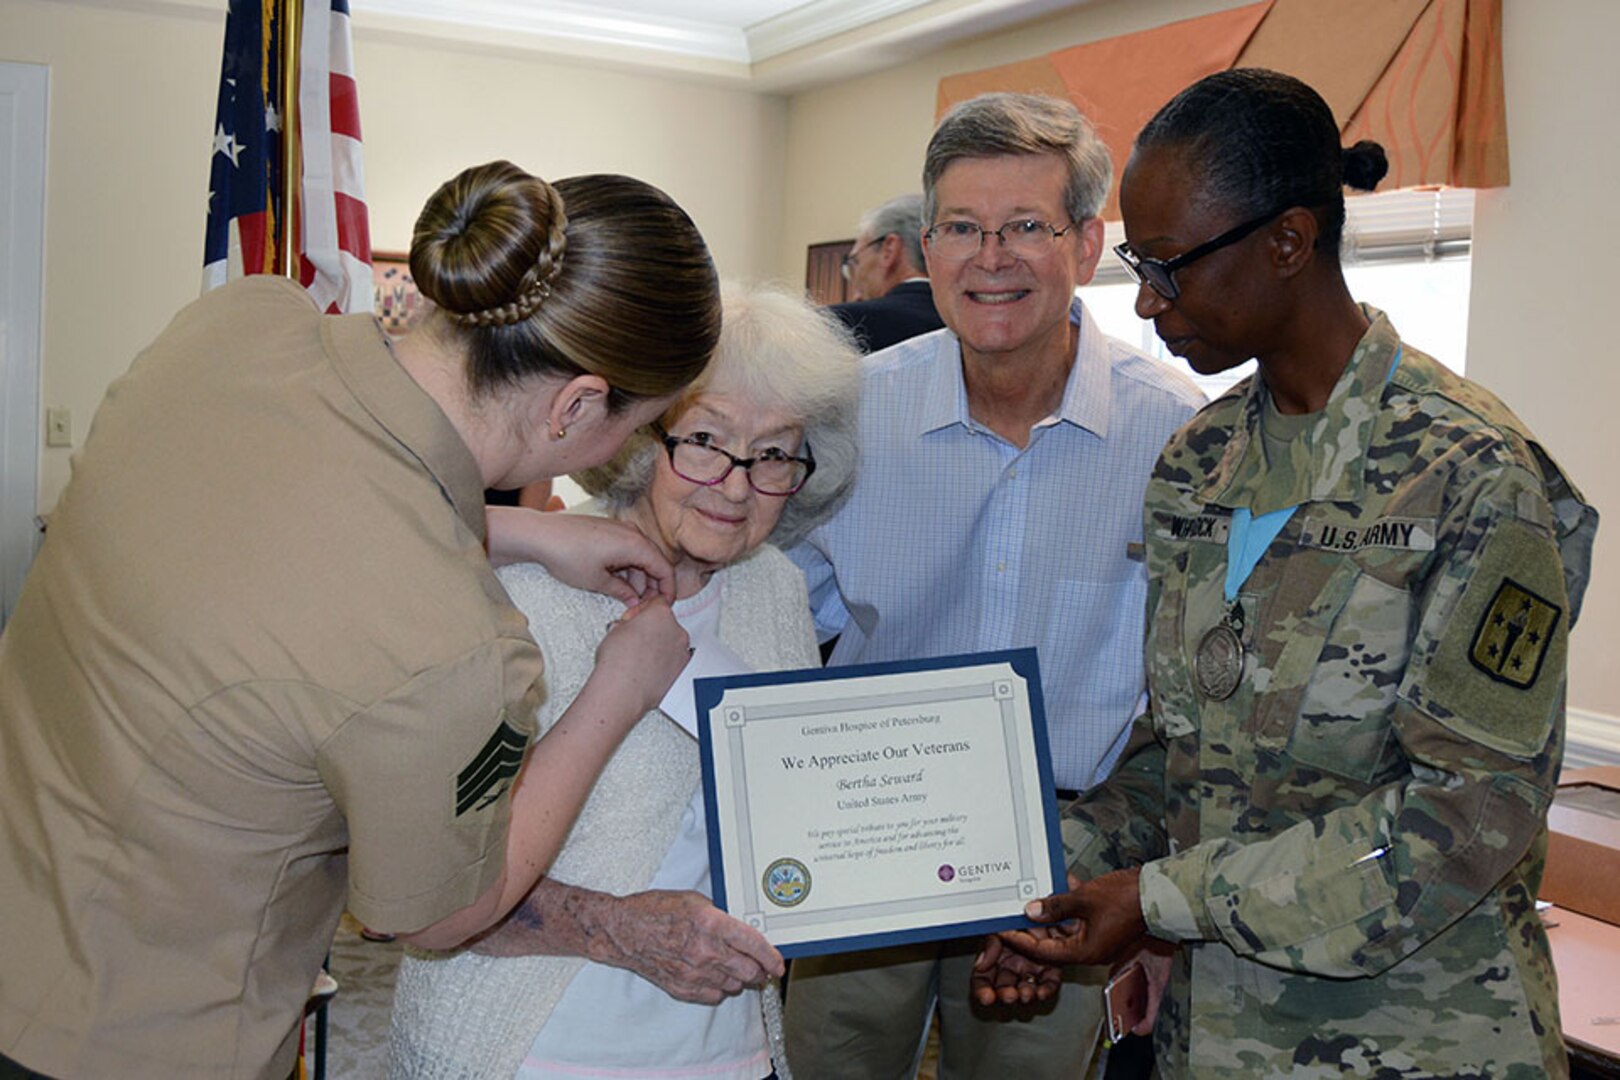 Defense Logistics Agency Aviation’s Marine Sgt. Caitlyn Baker decorates Bertha Steward, a veteran of the Women’s Army Corp and resident, with a Memorial Day medal as Fort Lee’s Army Master Sgt. Pamela Whitlock presents her a certificate of appreciation at the Crossings at Iron Bridge Memorial Day ceremony May 26, 2017.